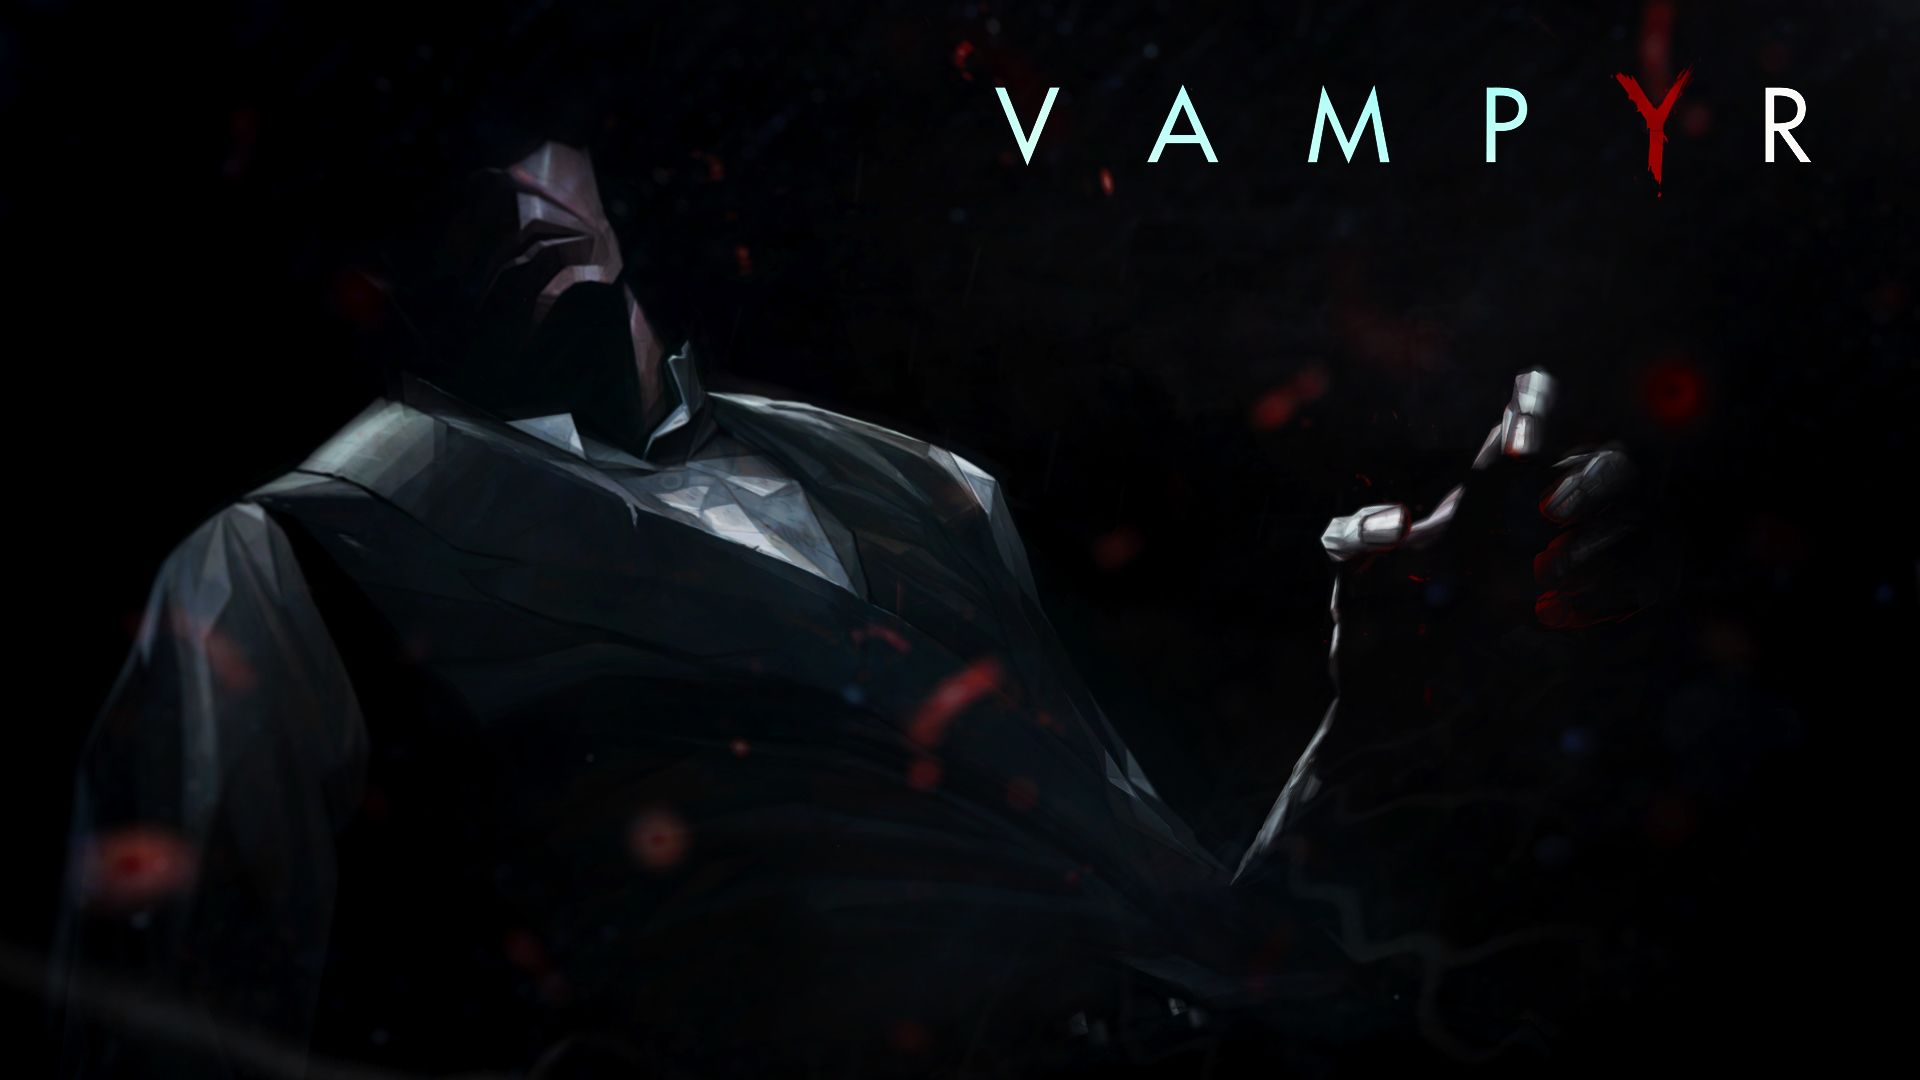 Vampyr Wallpaper in 1920x1080 resolution is a cool wallpaper for your PC, laptop, android or iPhone device. - Vampire